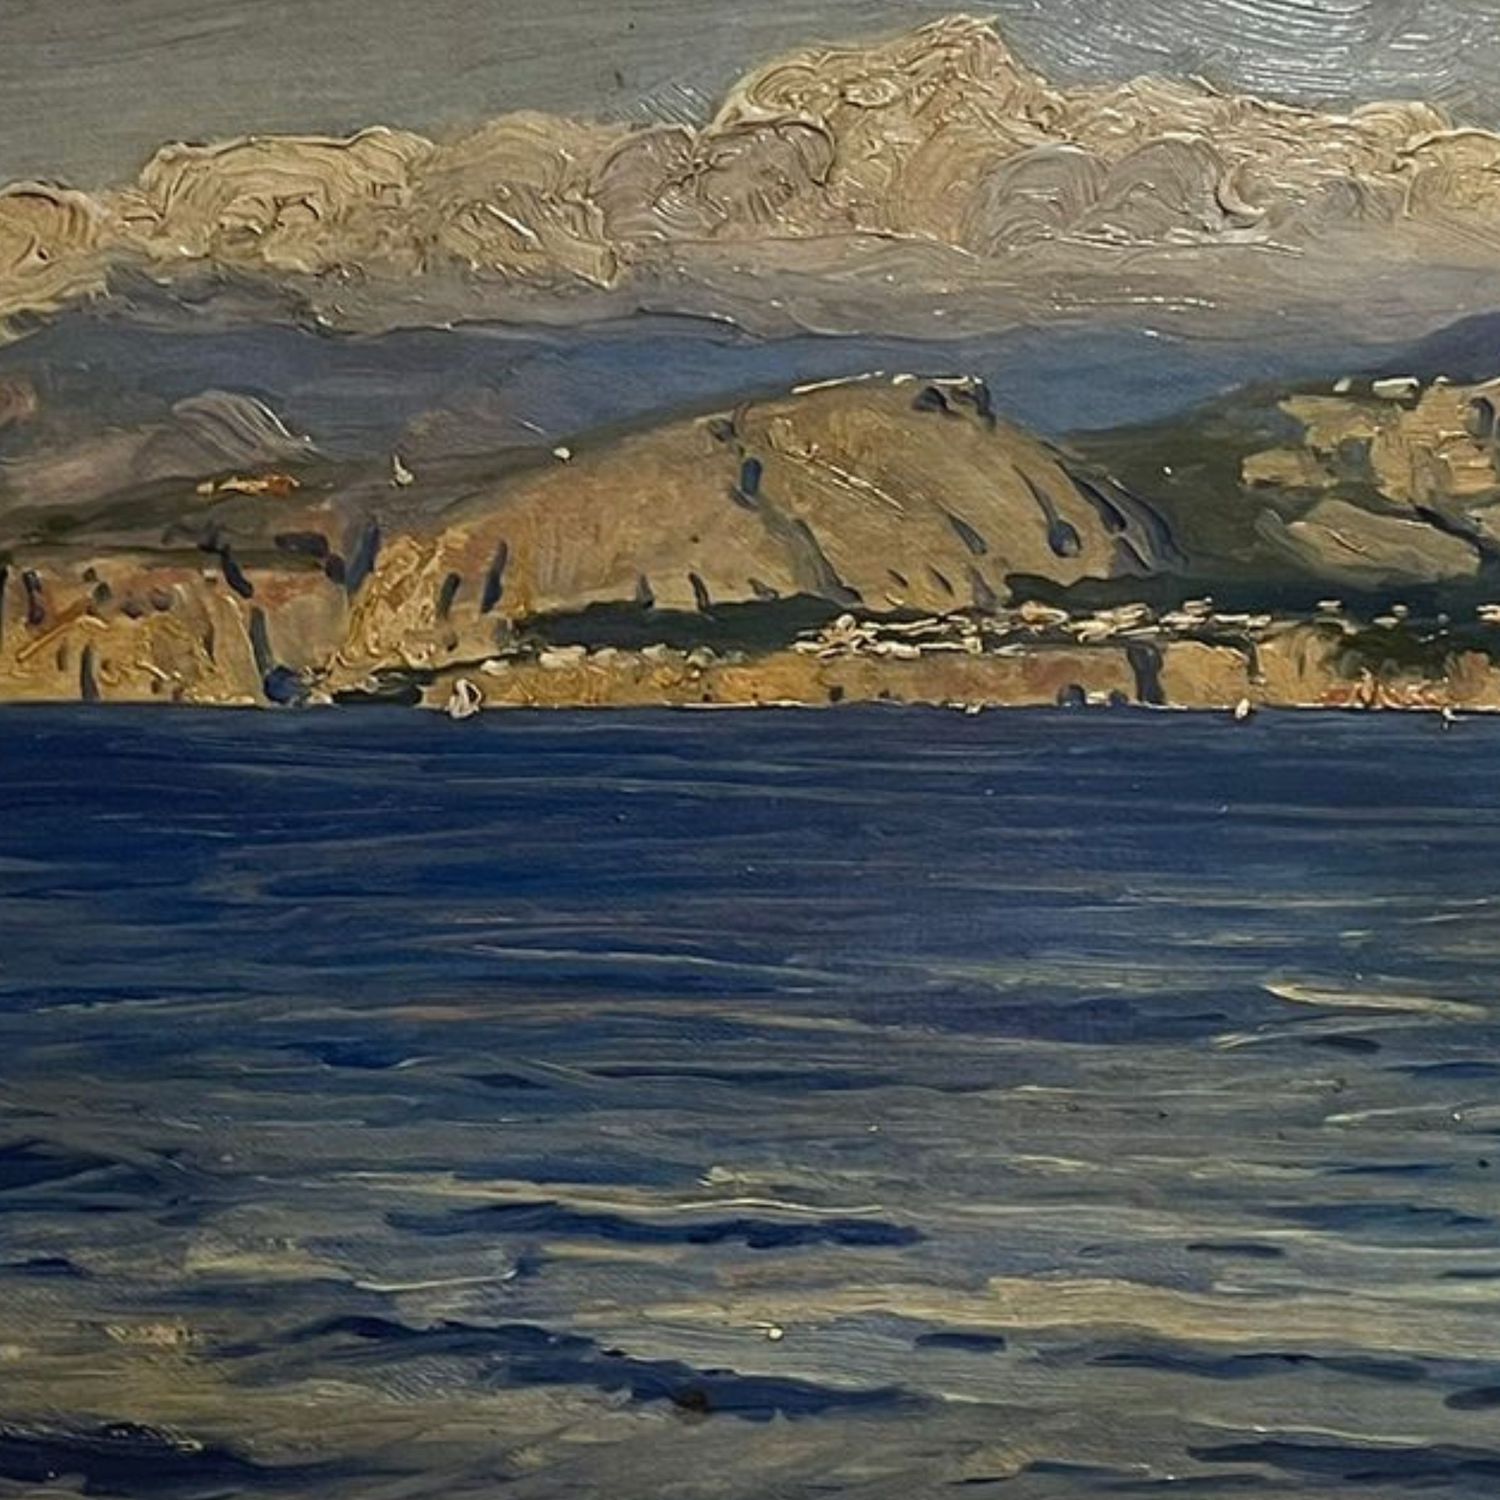 Seascape - Max Roeder (1866 - 1947) - Image 3 of 7